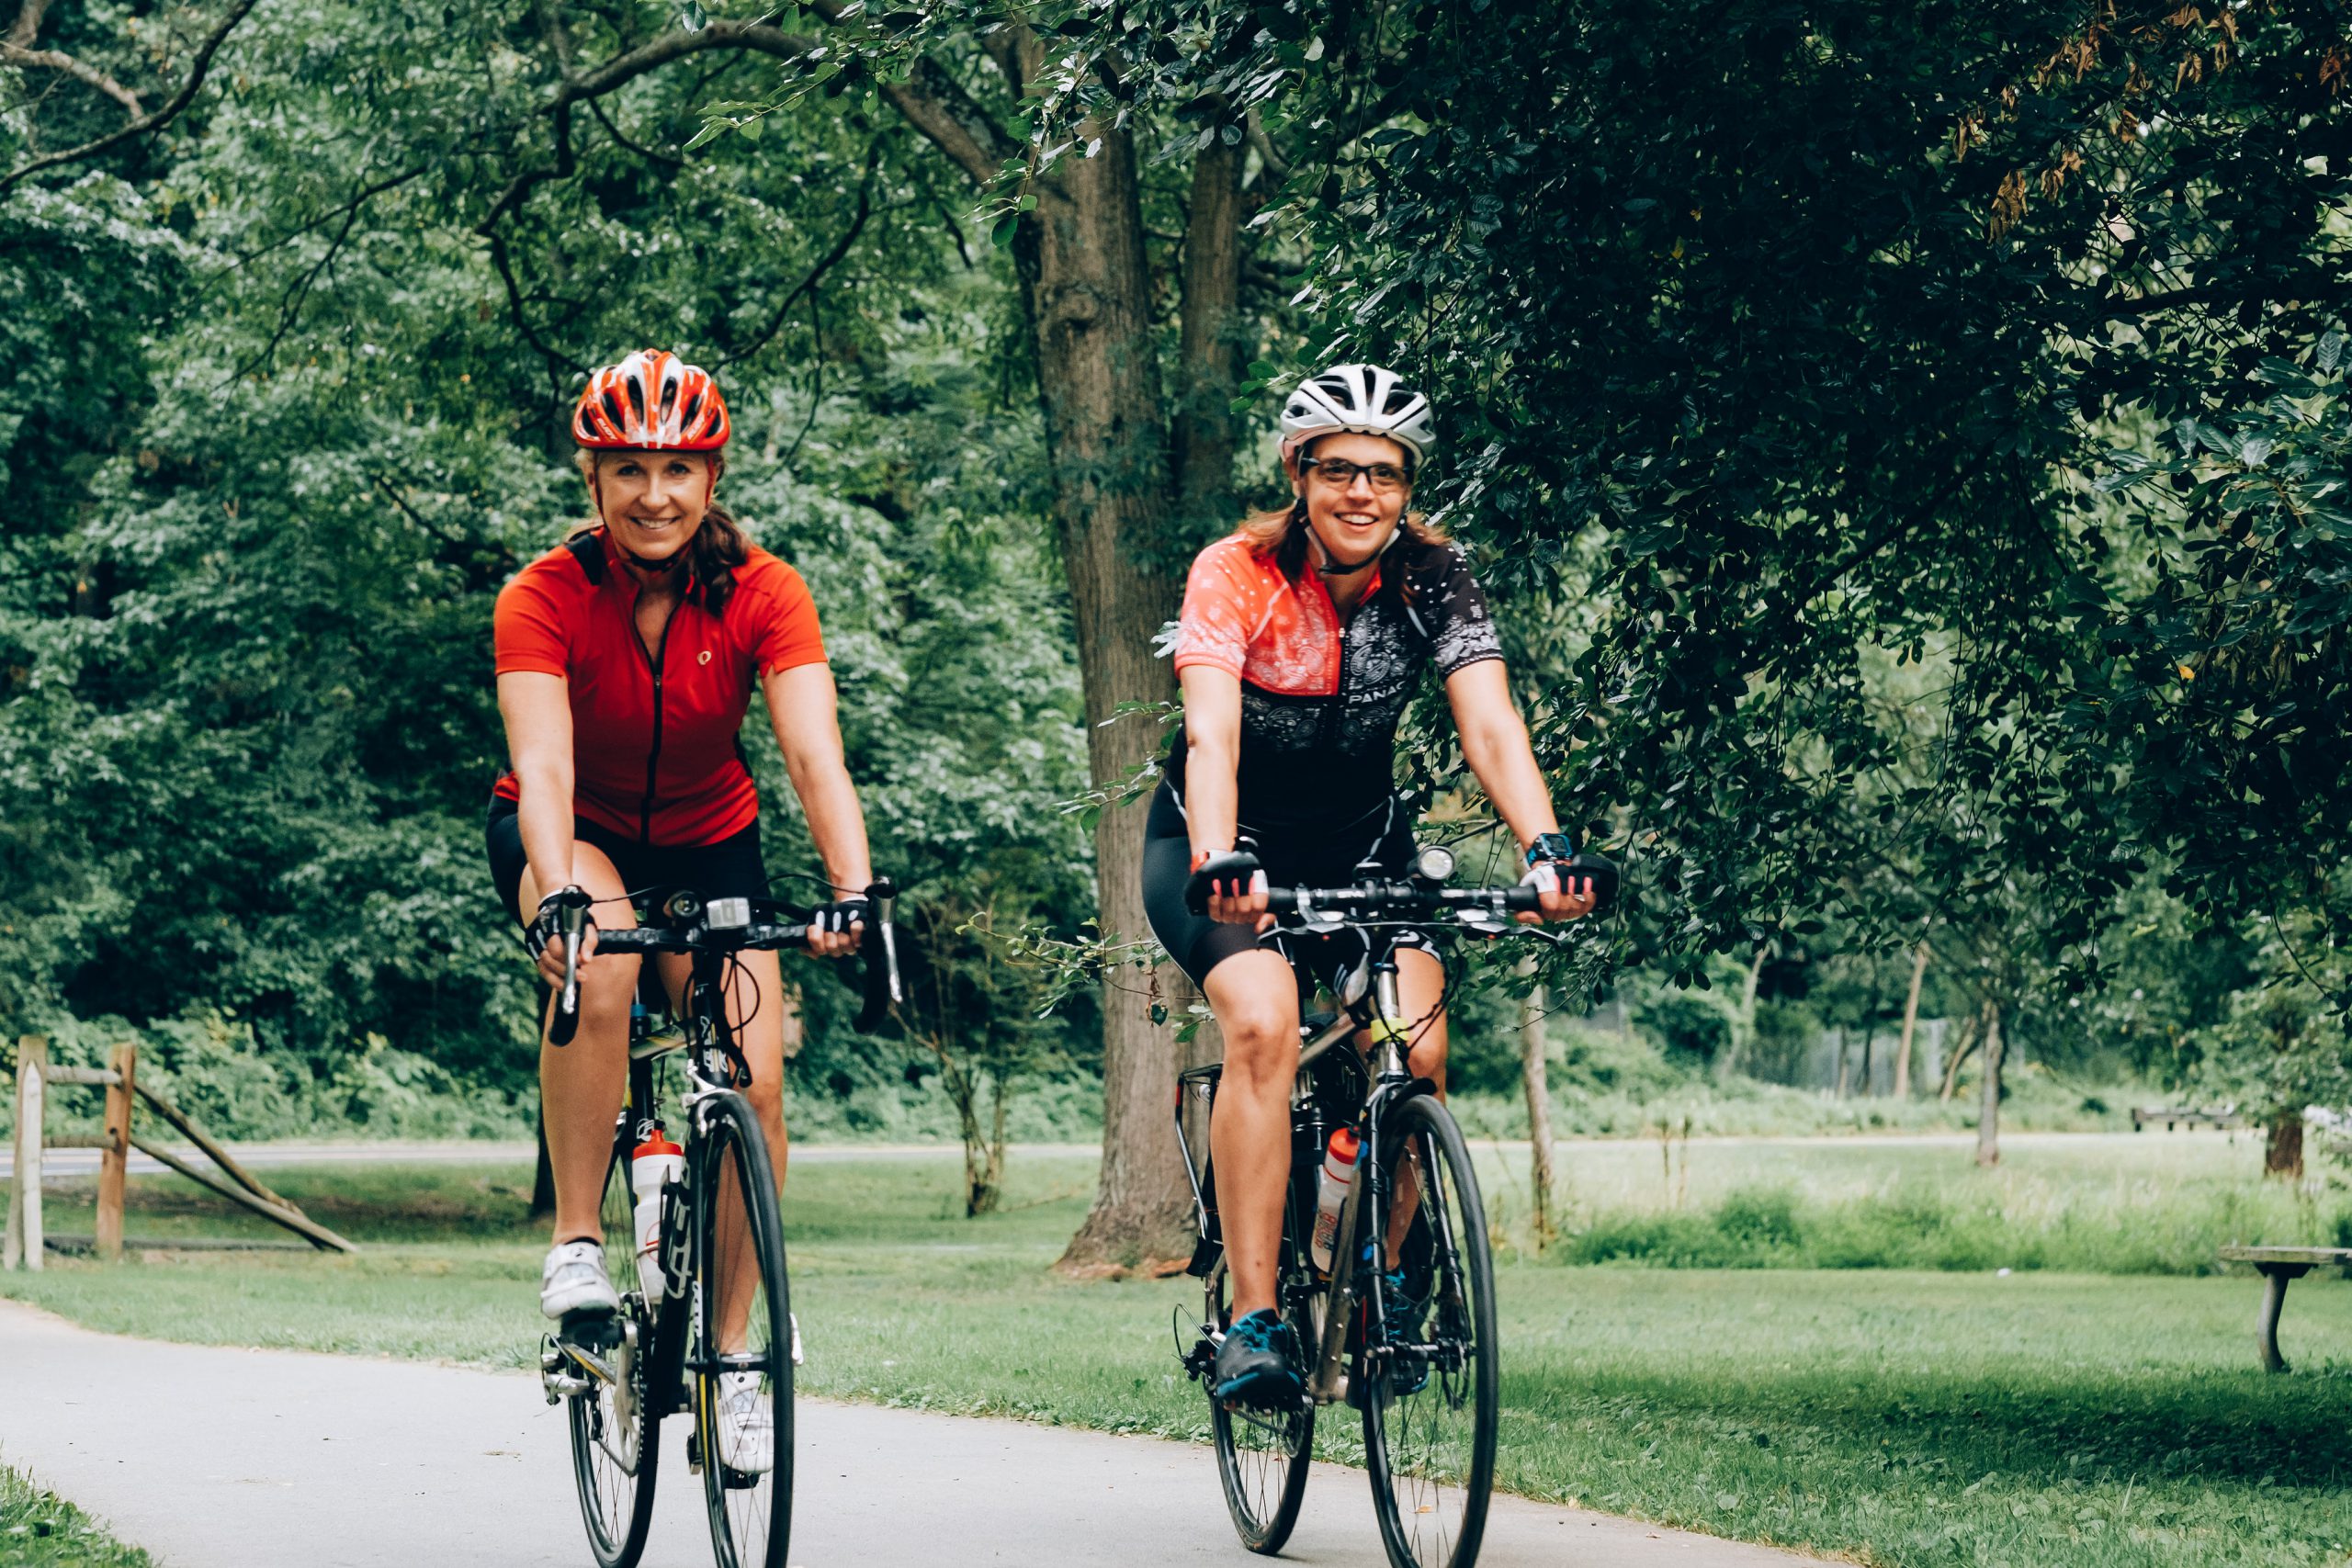 two women biking - How to Ditch Old Habits and Adopt Better Ones